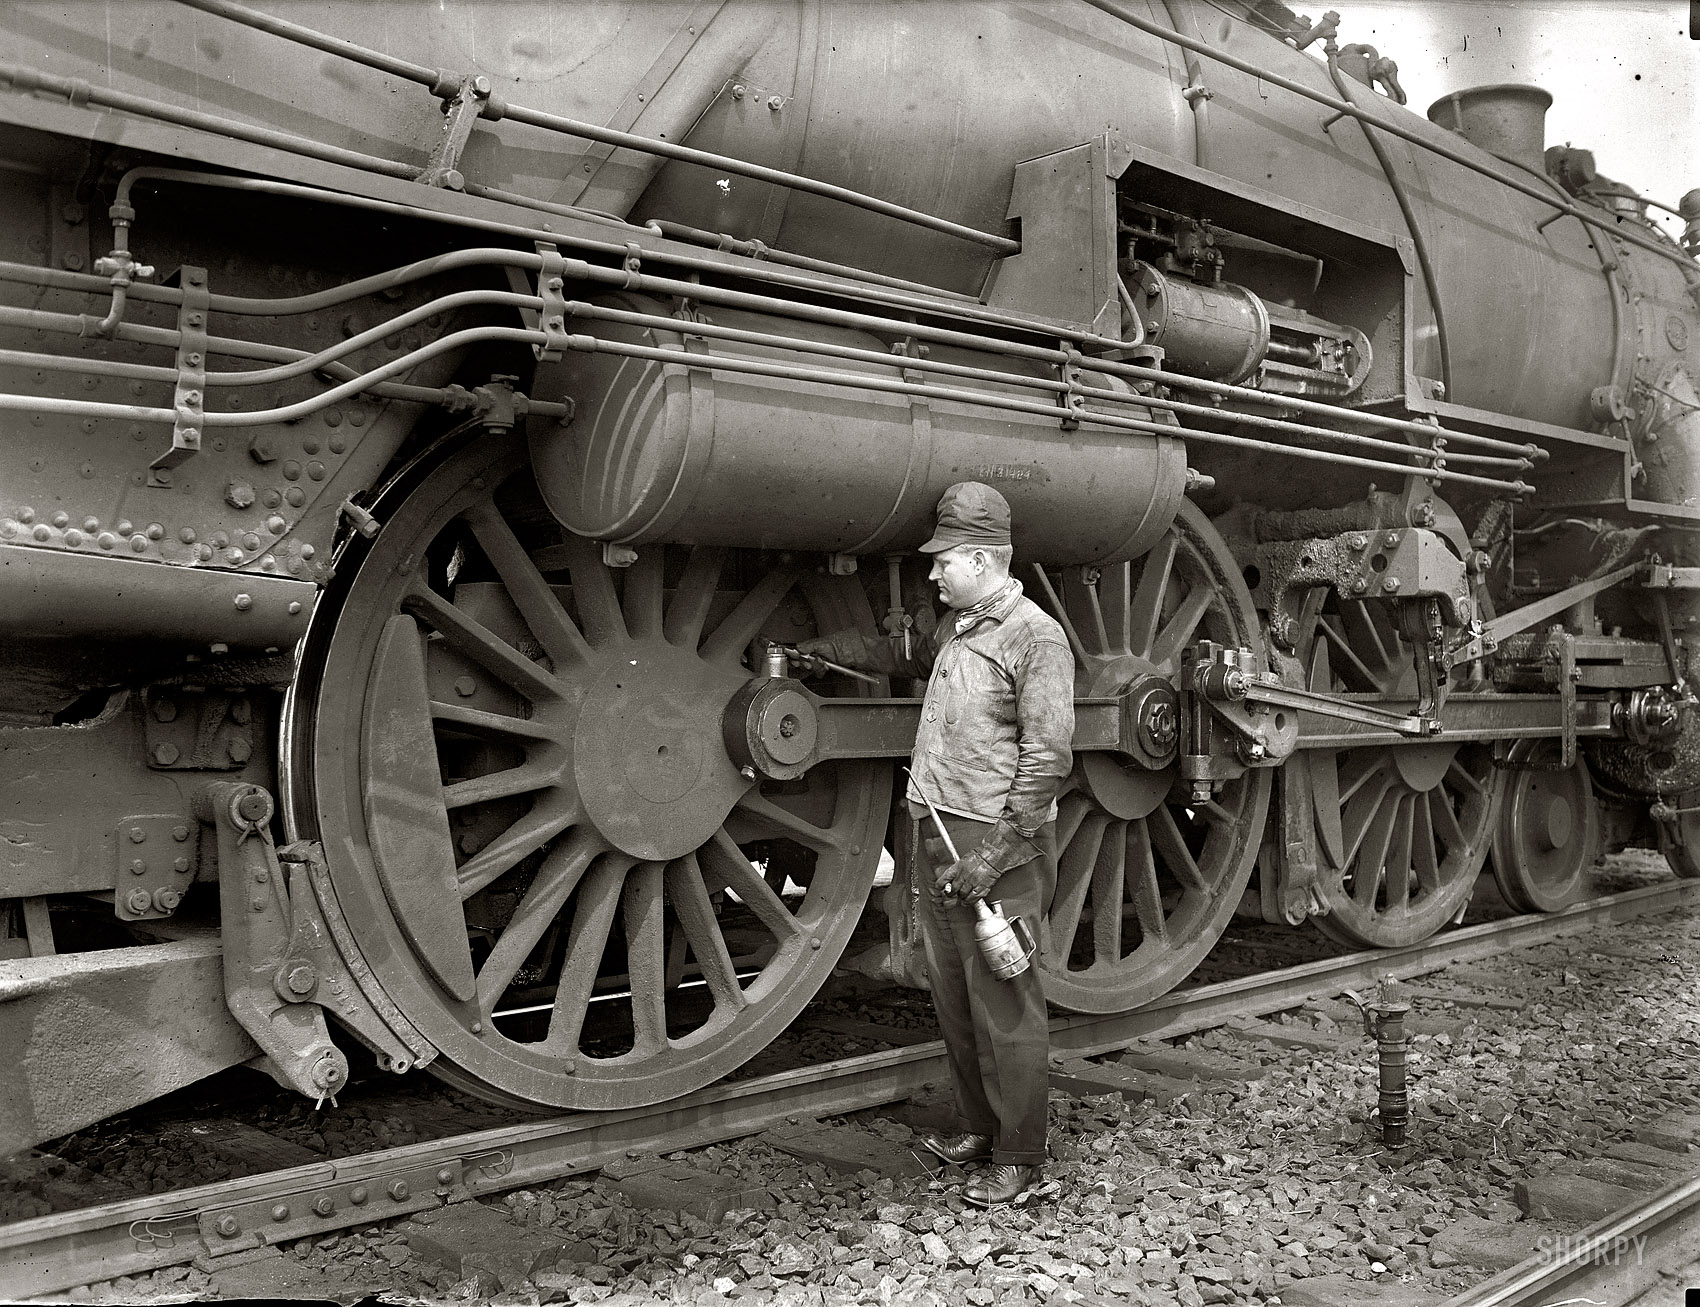 Washington, D.C., June 1924. "Congressman John C. Schafer of Wisconsin." Who seems to have been something of a railfan. National Photo Co. View full size.